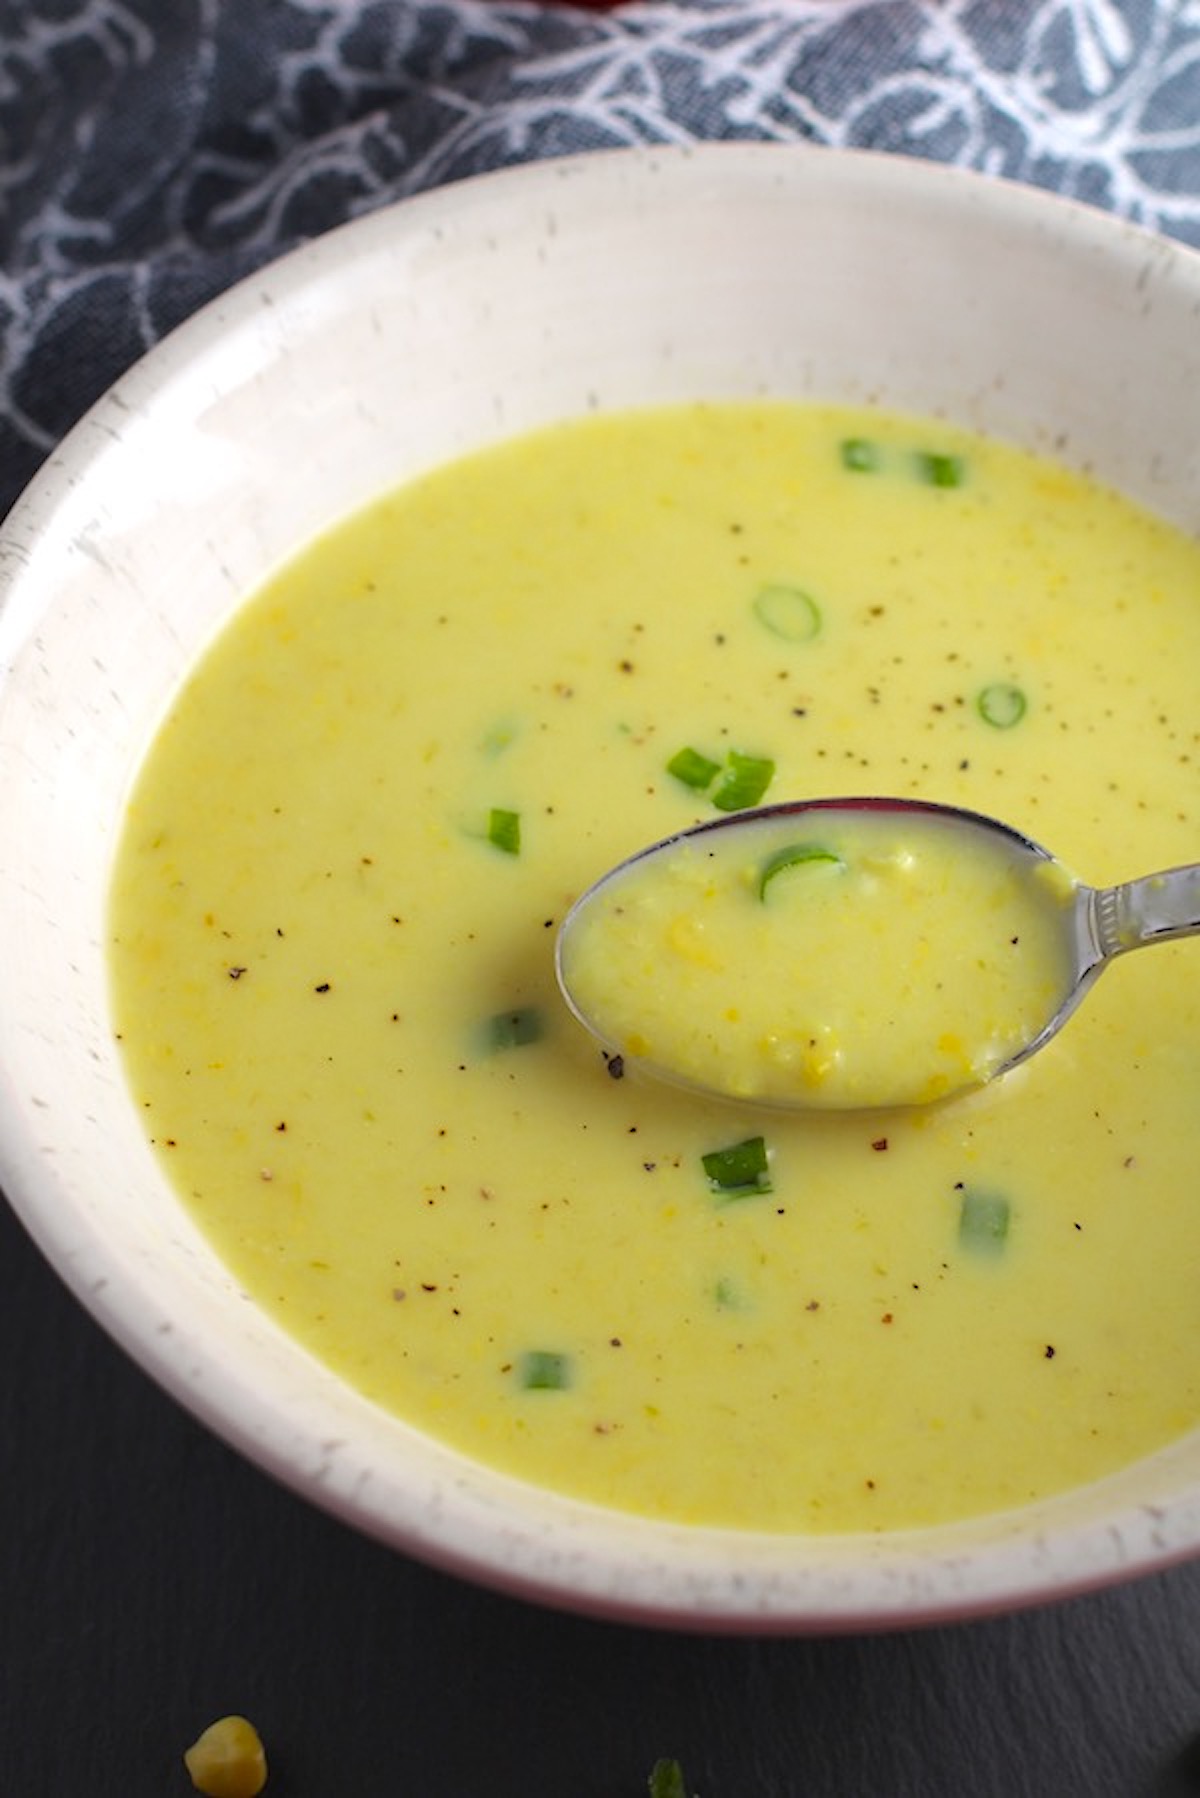 Gluten free Corn Chowder in a bowl with a spoon scooping up some and scallions on top as garnish.